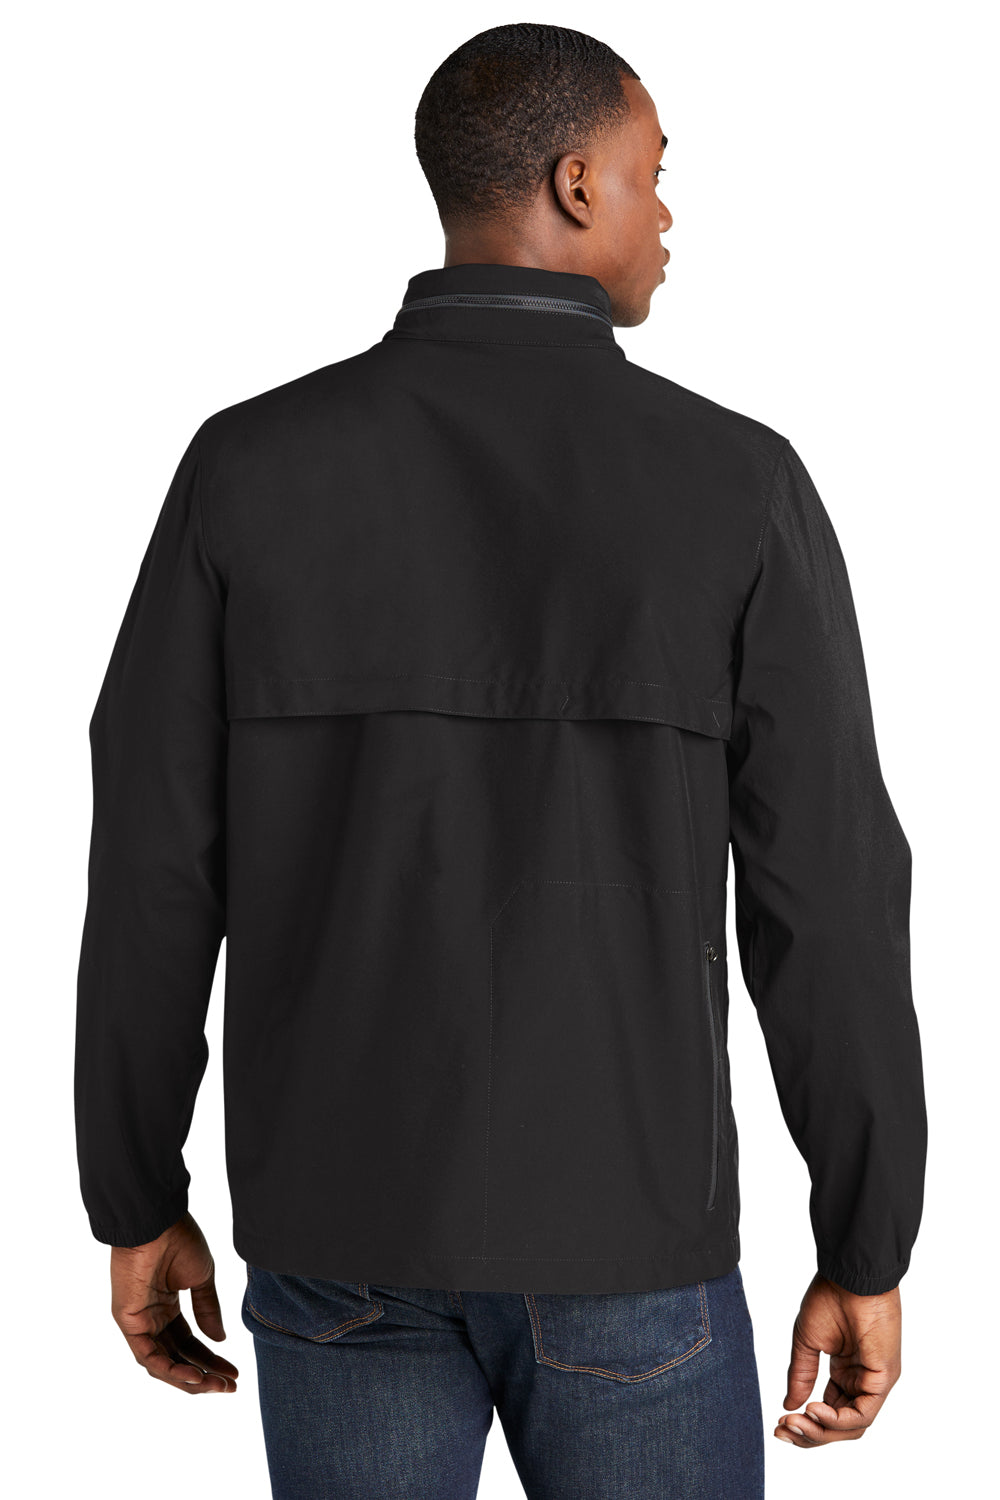 The North Face NF0A5ISG Packable Travel Full Zip Jacket Black Back